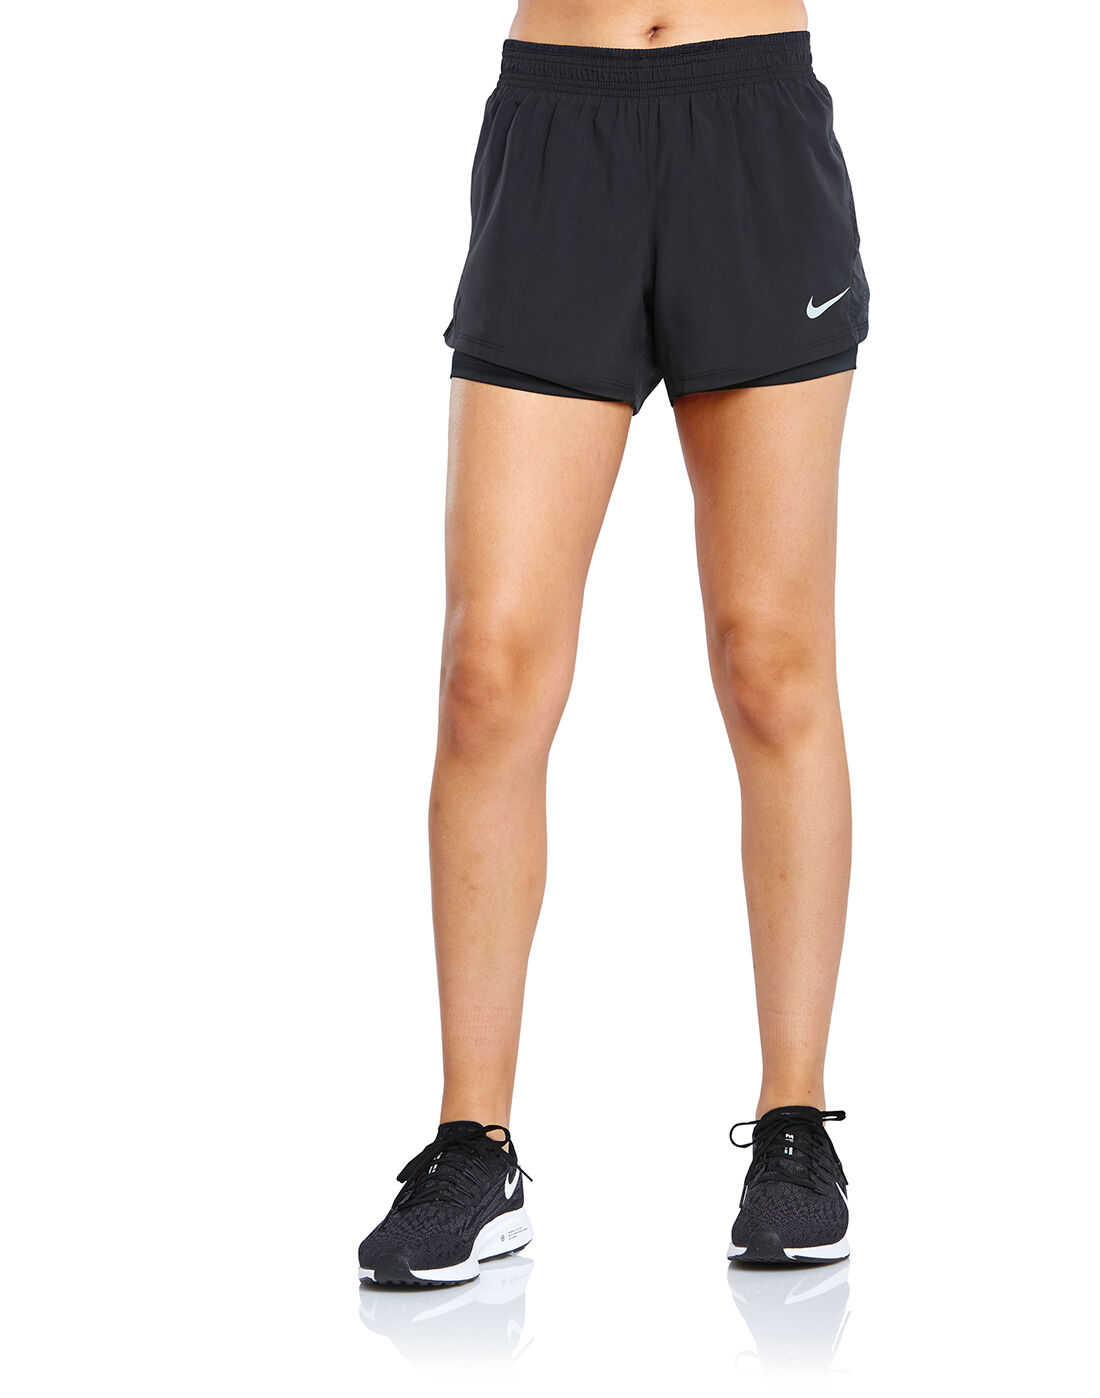 Nike Womens 10k 2-in-1 Shorts - Black | Life Style Sports IE